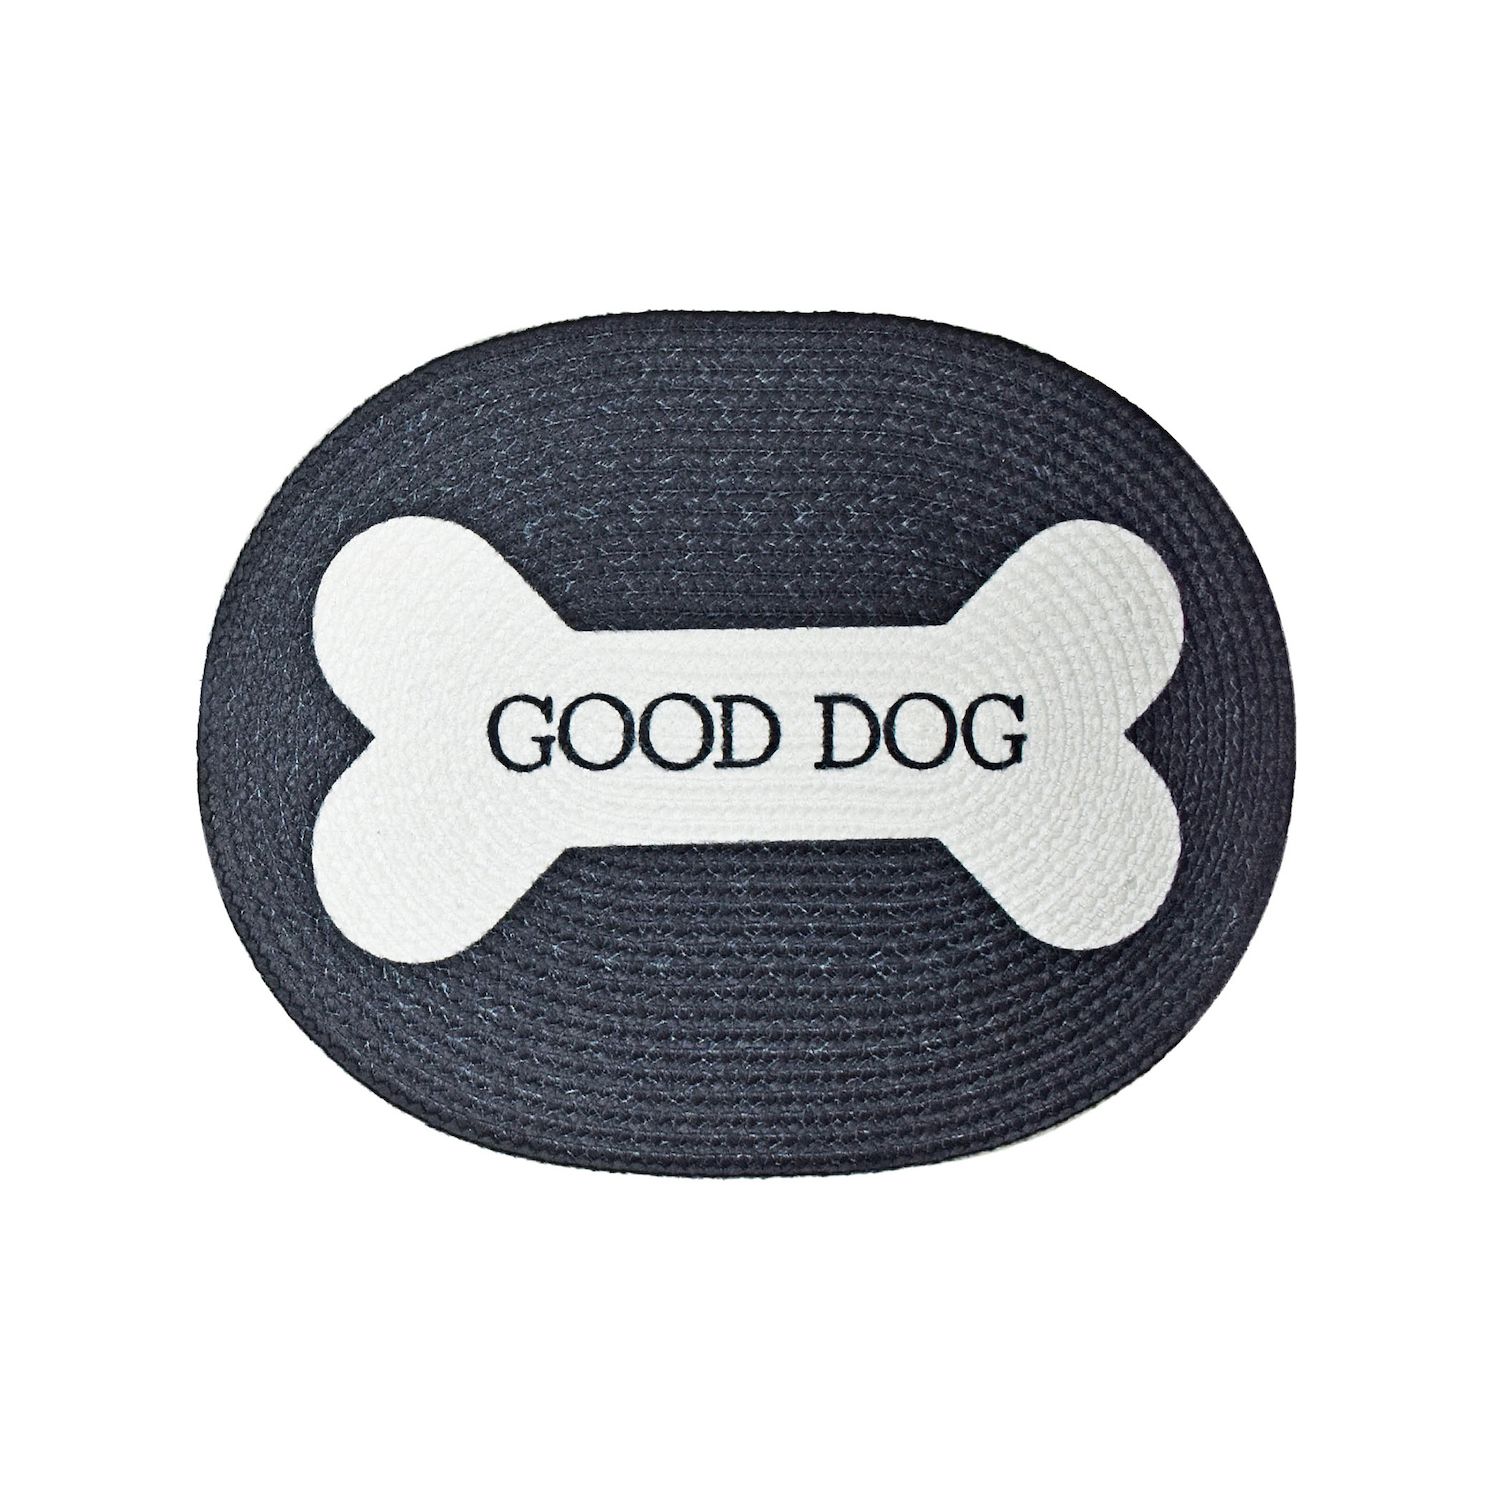 Paws and Bones Water Hog Mat - Great Gear And Gifts For Dogs at Home or  On-The-Go